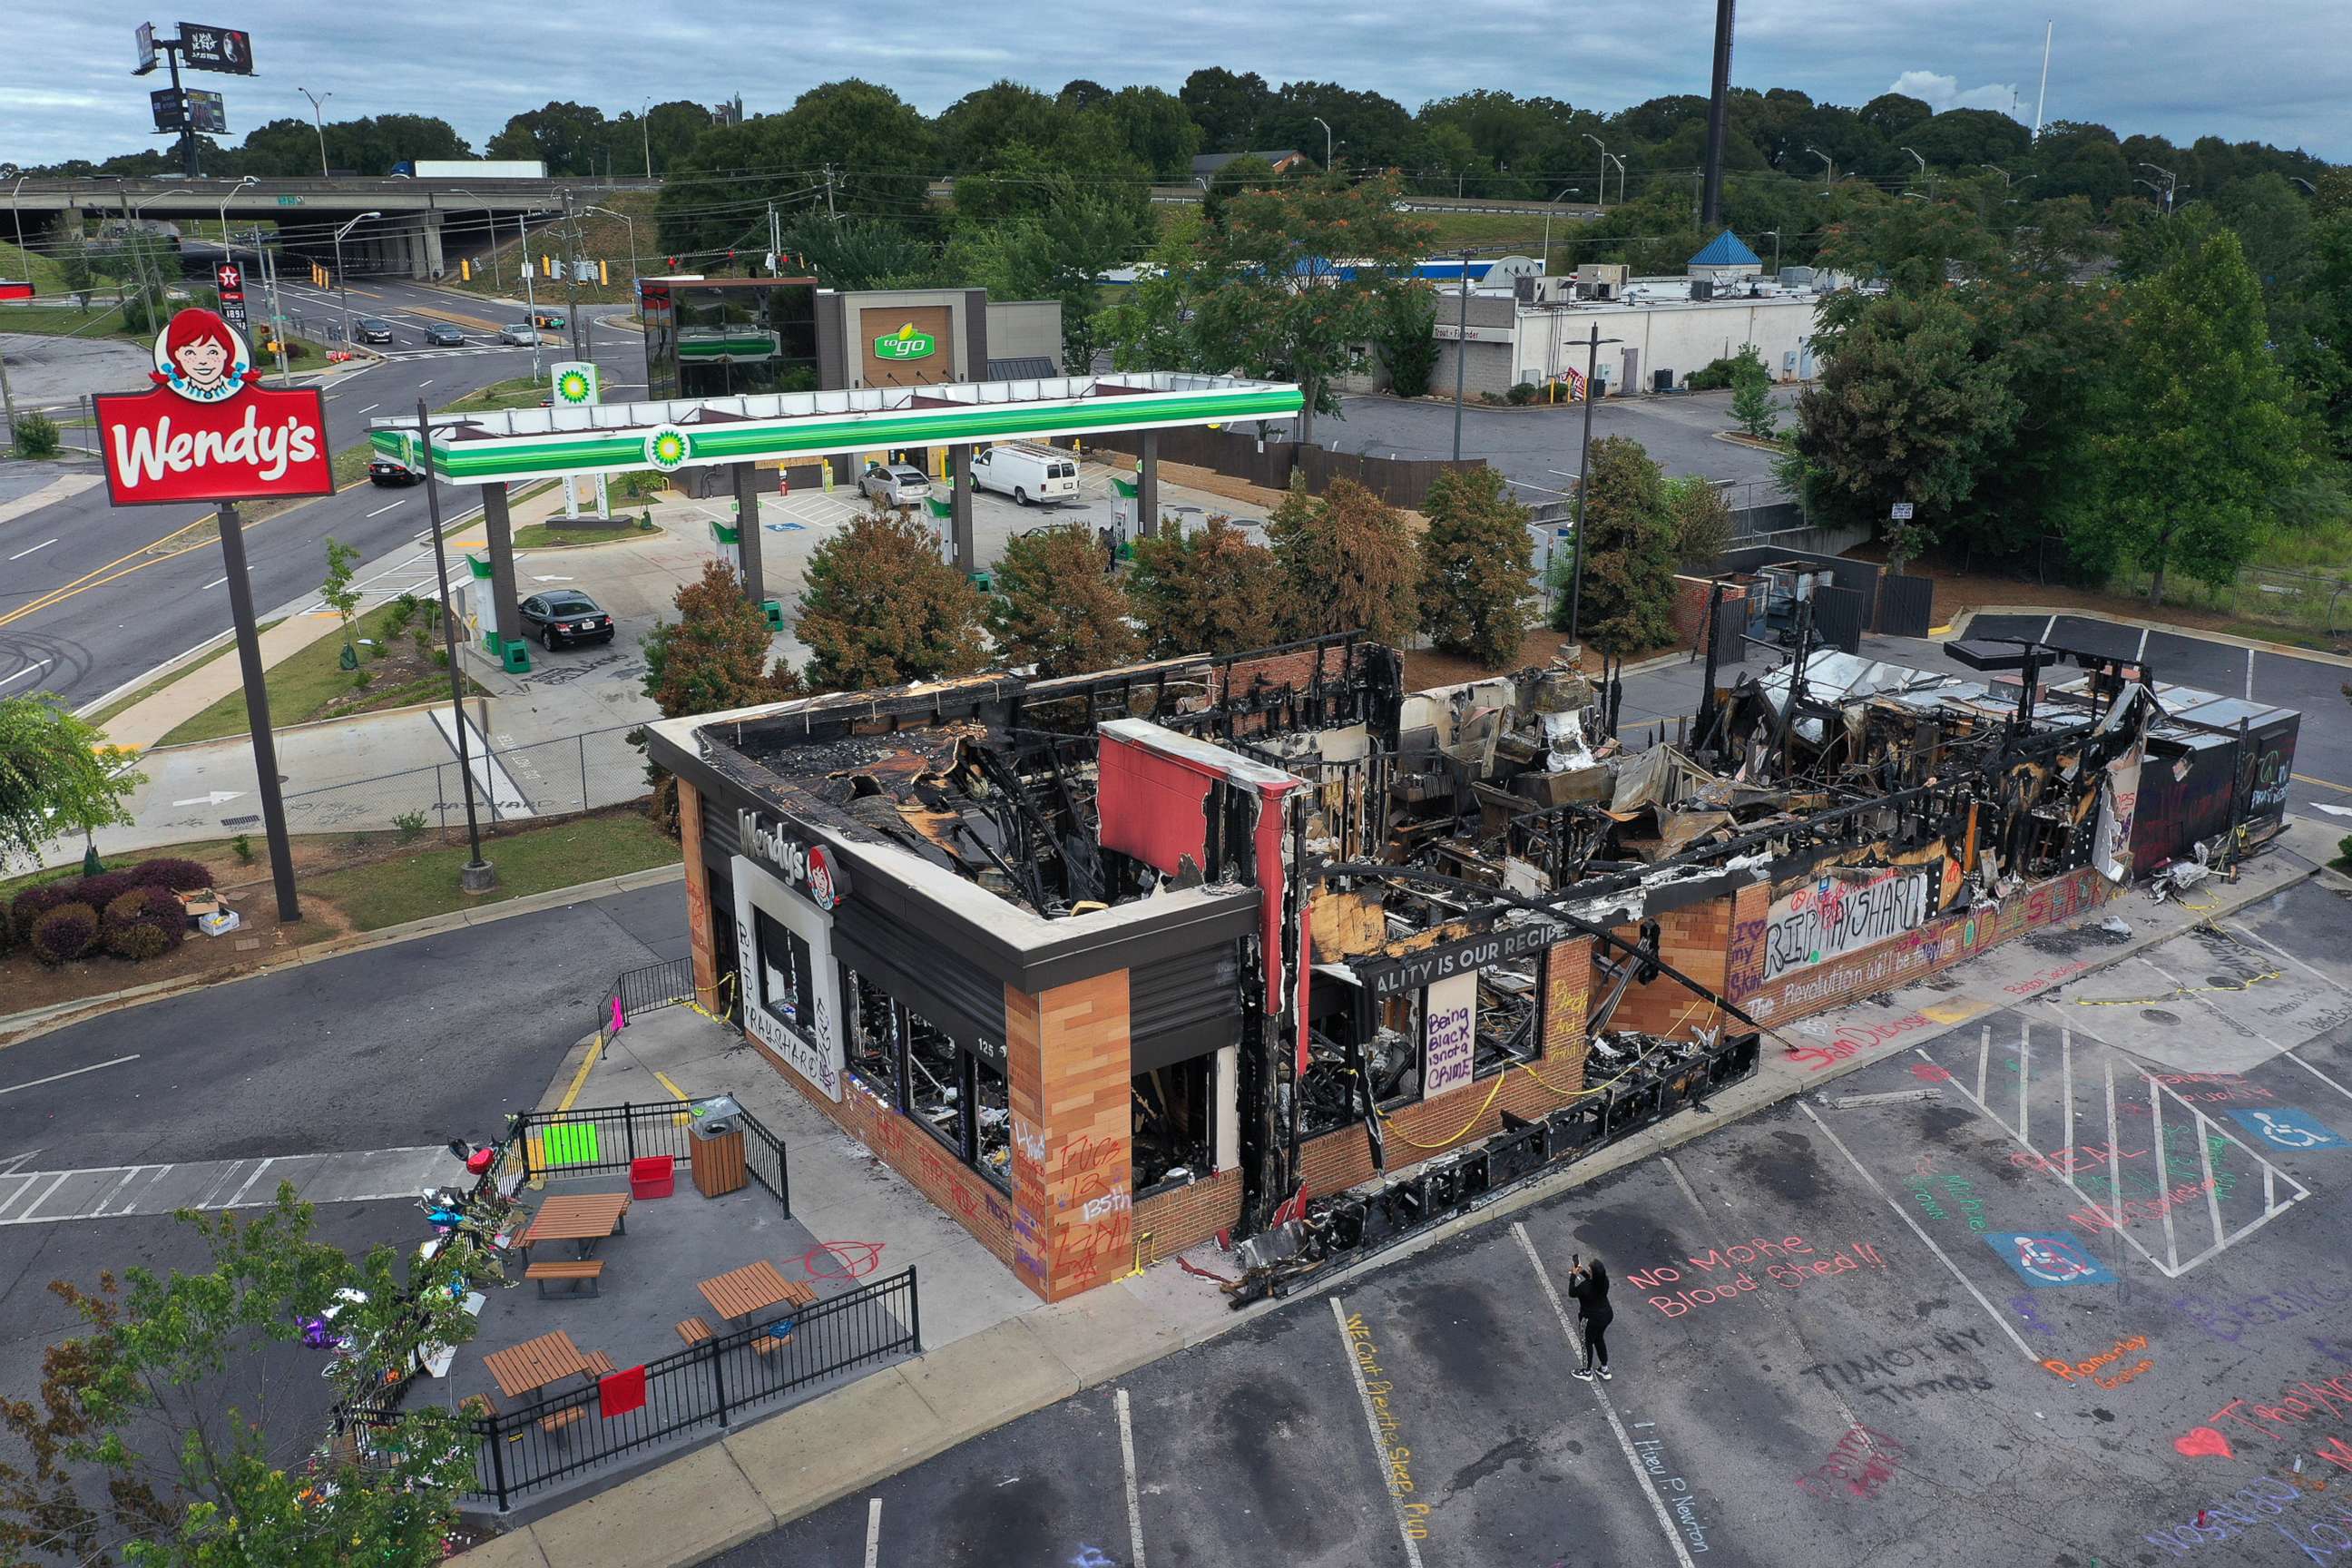 PHOTO: The Wendy's restaurant that was set on fire by demonstrators after Rayshard Brooks was killed is seen on June 17, 2020 in Atlanta.